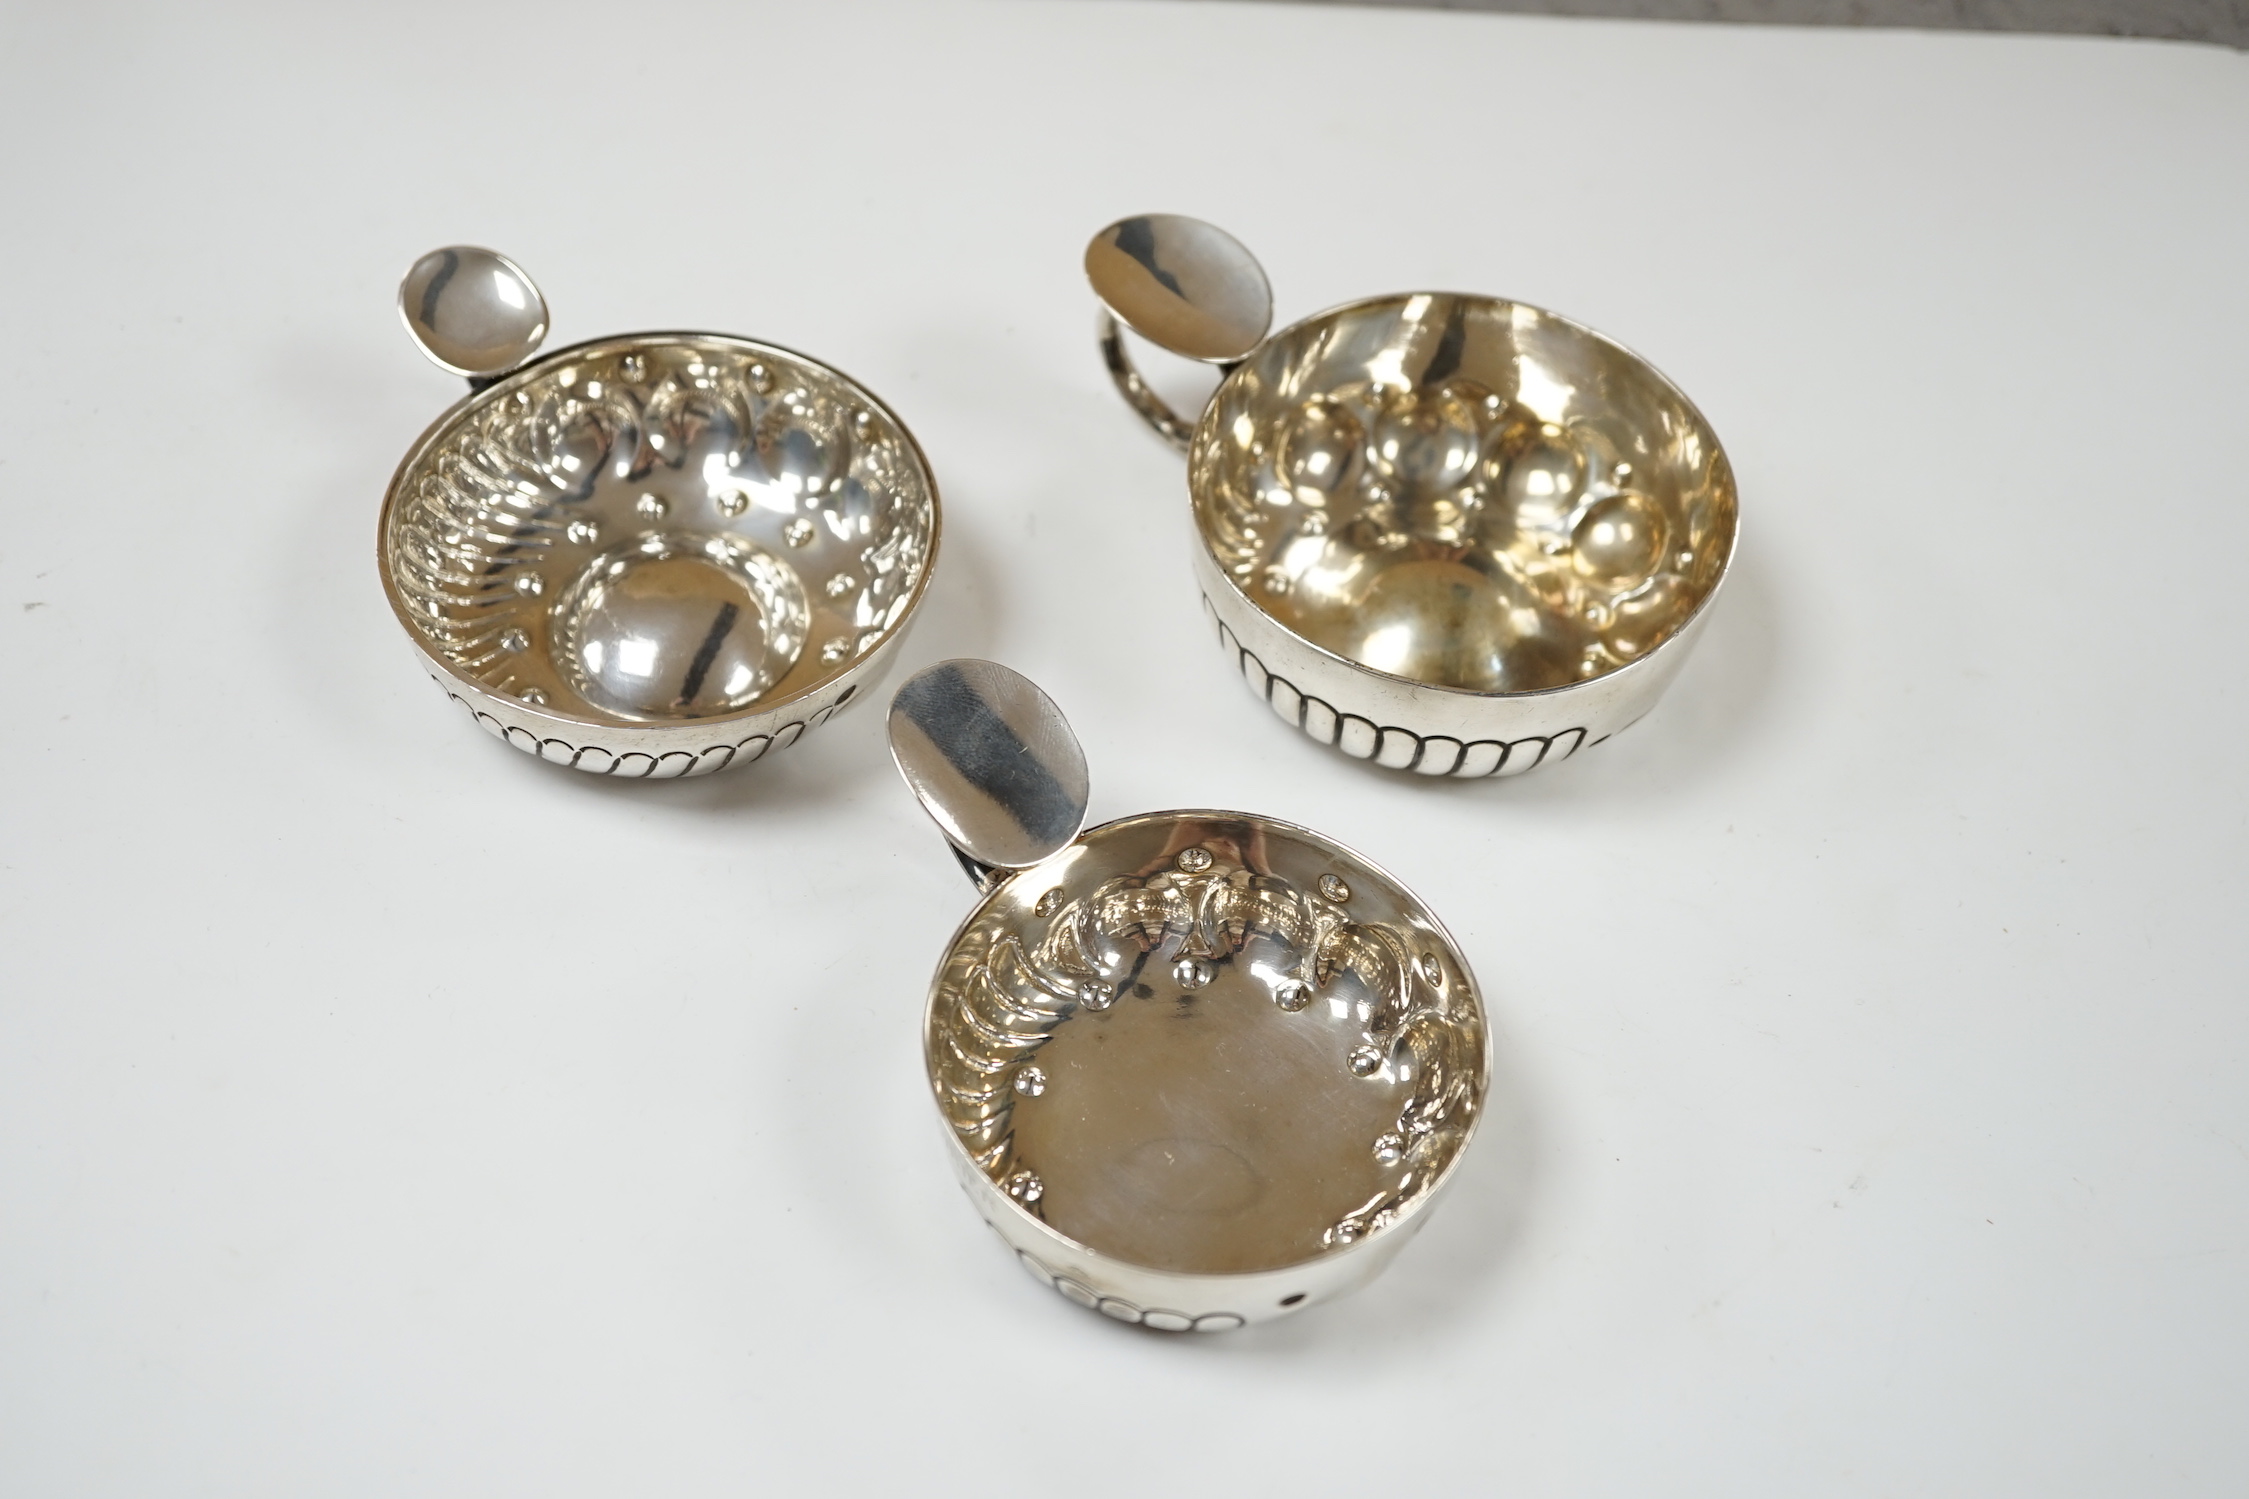 Three assorted late 19th/early 20th century French white metal taste vin, largest 11.1cm over handle.